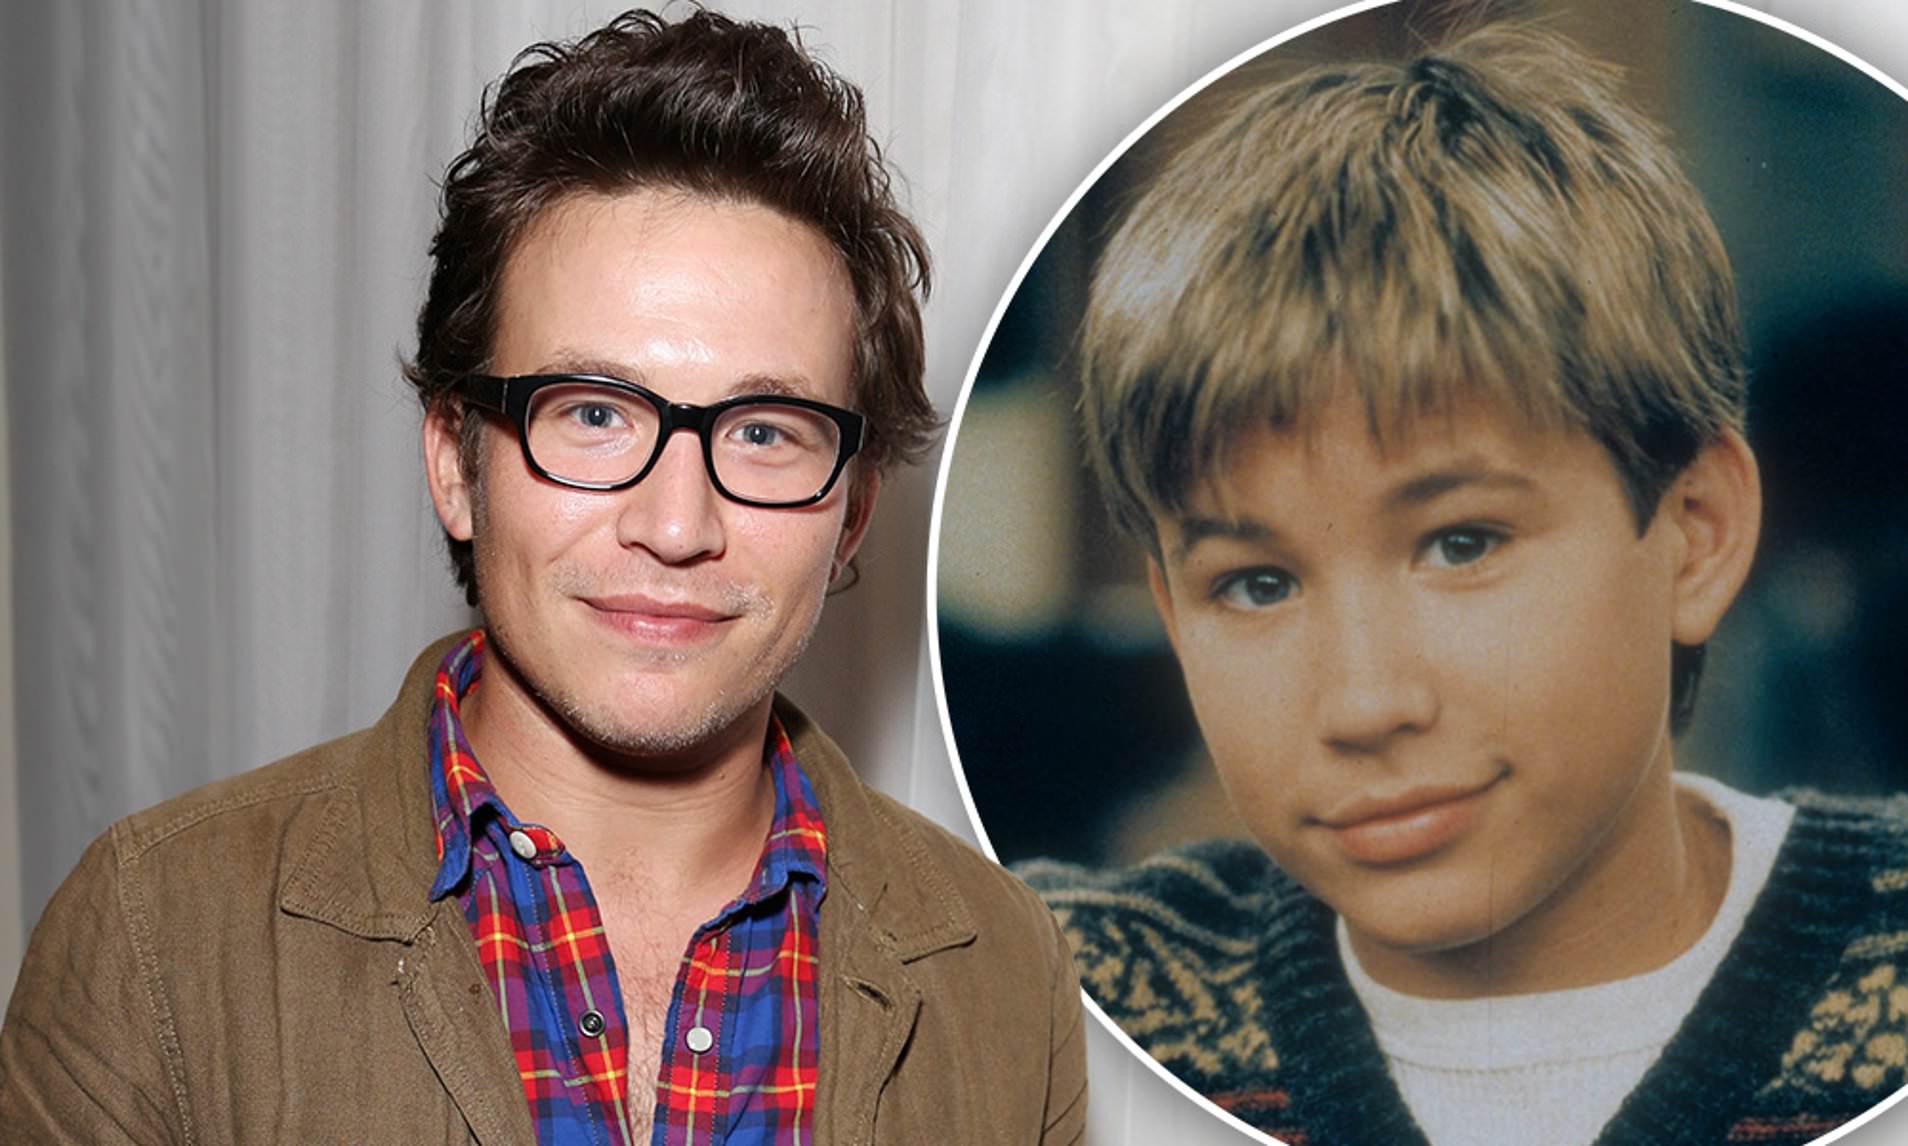 Jonathan Taylor Thomas Wiki, Bio, Age, Net Worth, and Other Facts